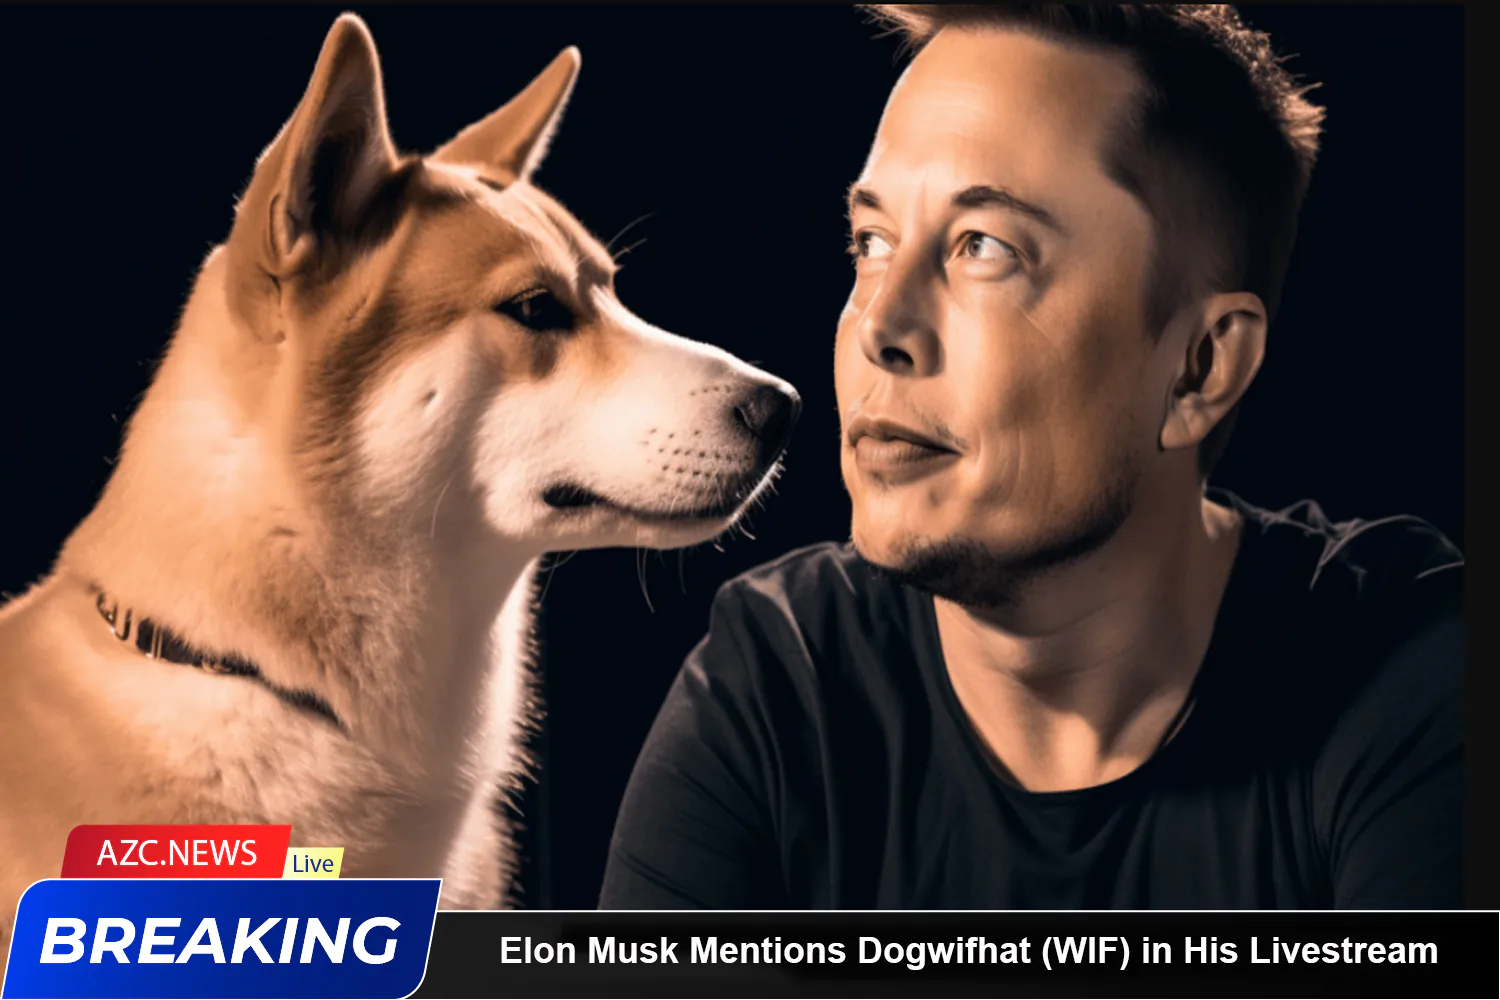 Elon Musk Mentions Dogwifhat (wif) In His Livestream